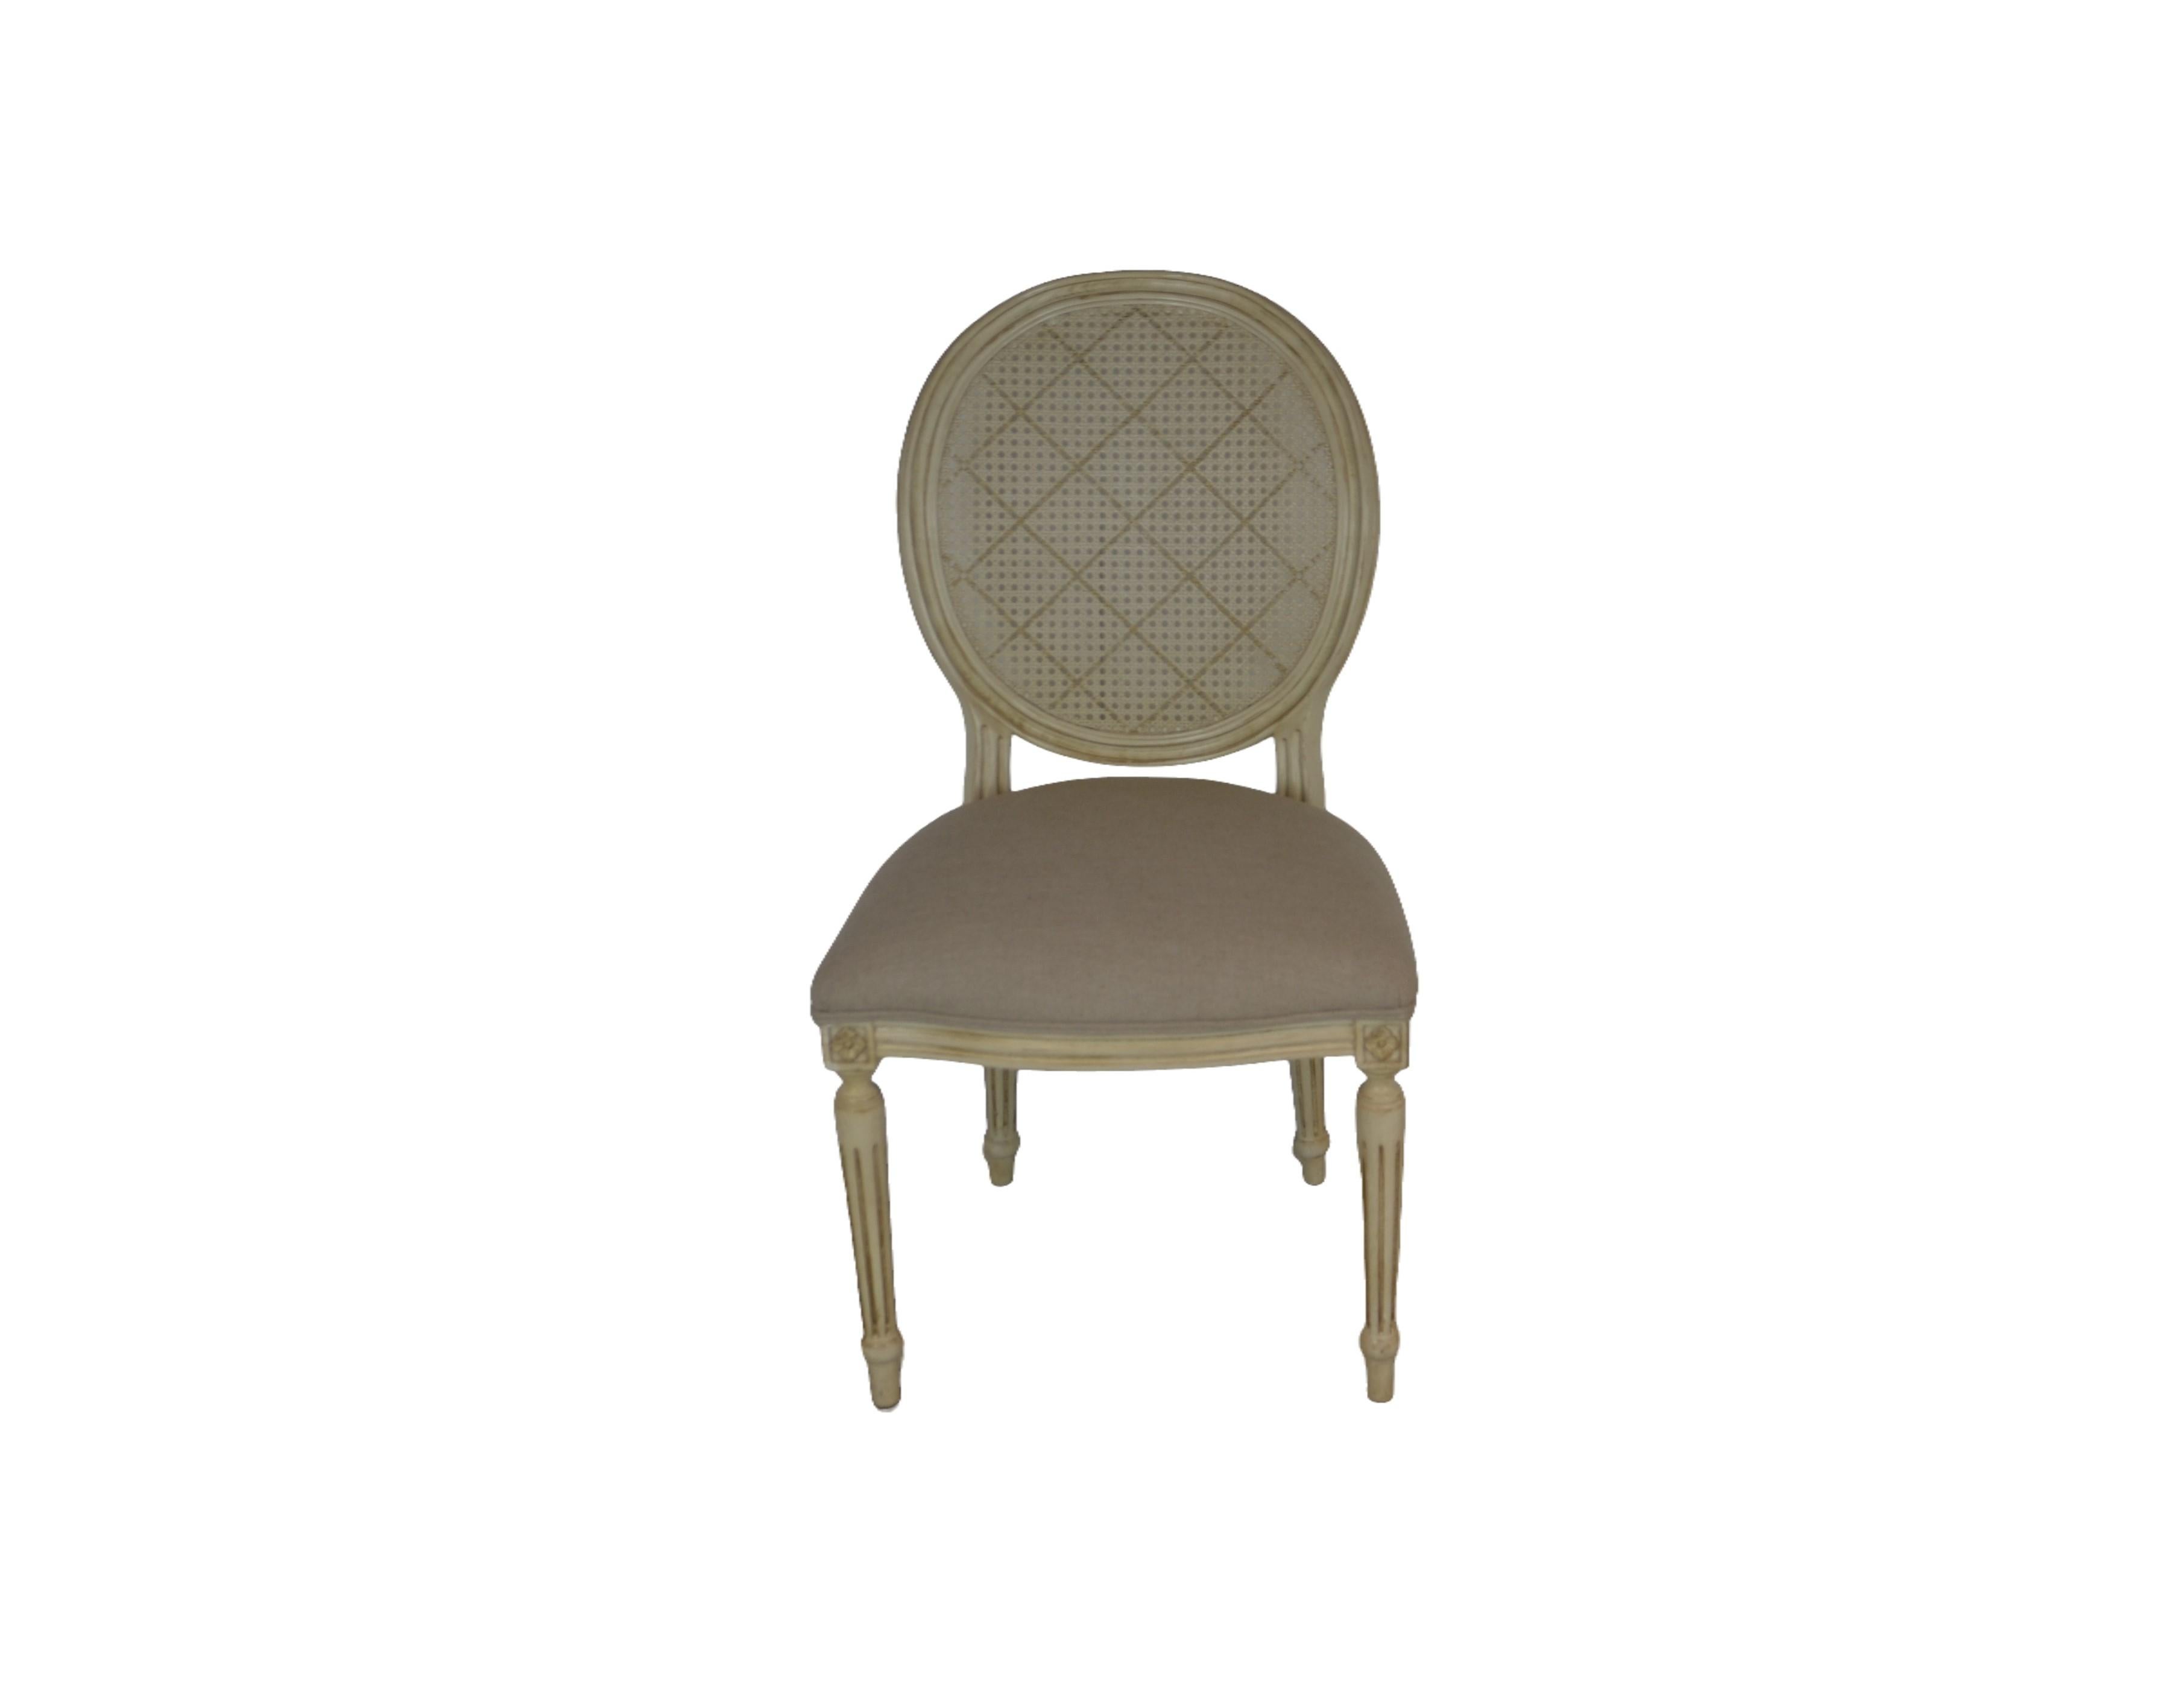 Set of 6 Louis xvi style dining chairs. The back is cane and the seats are upholstered in light gray linen. Pair of armchair Dimensions: 26